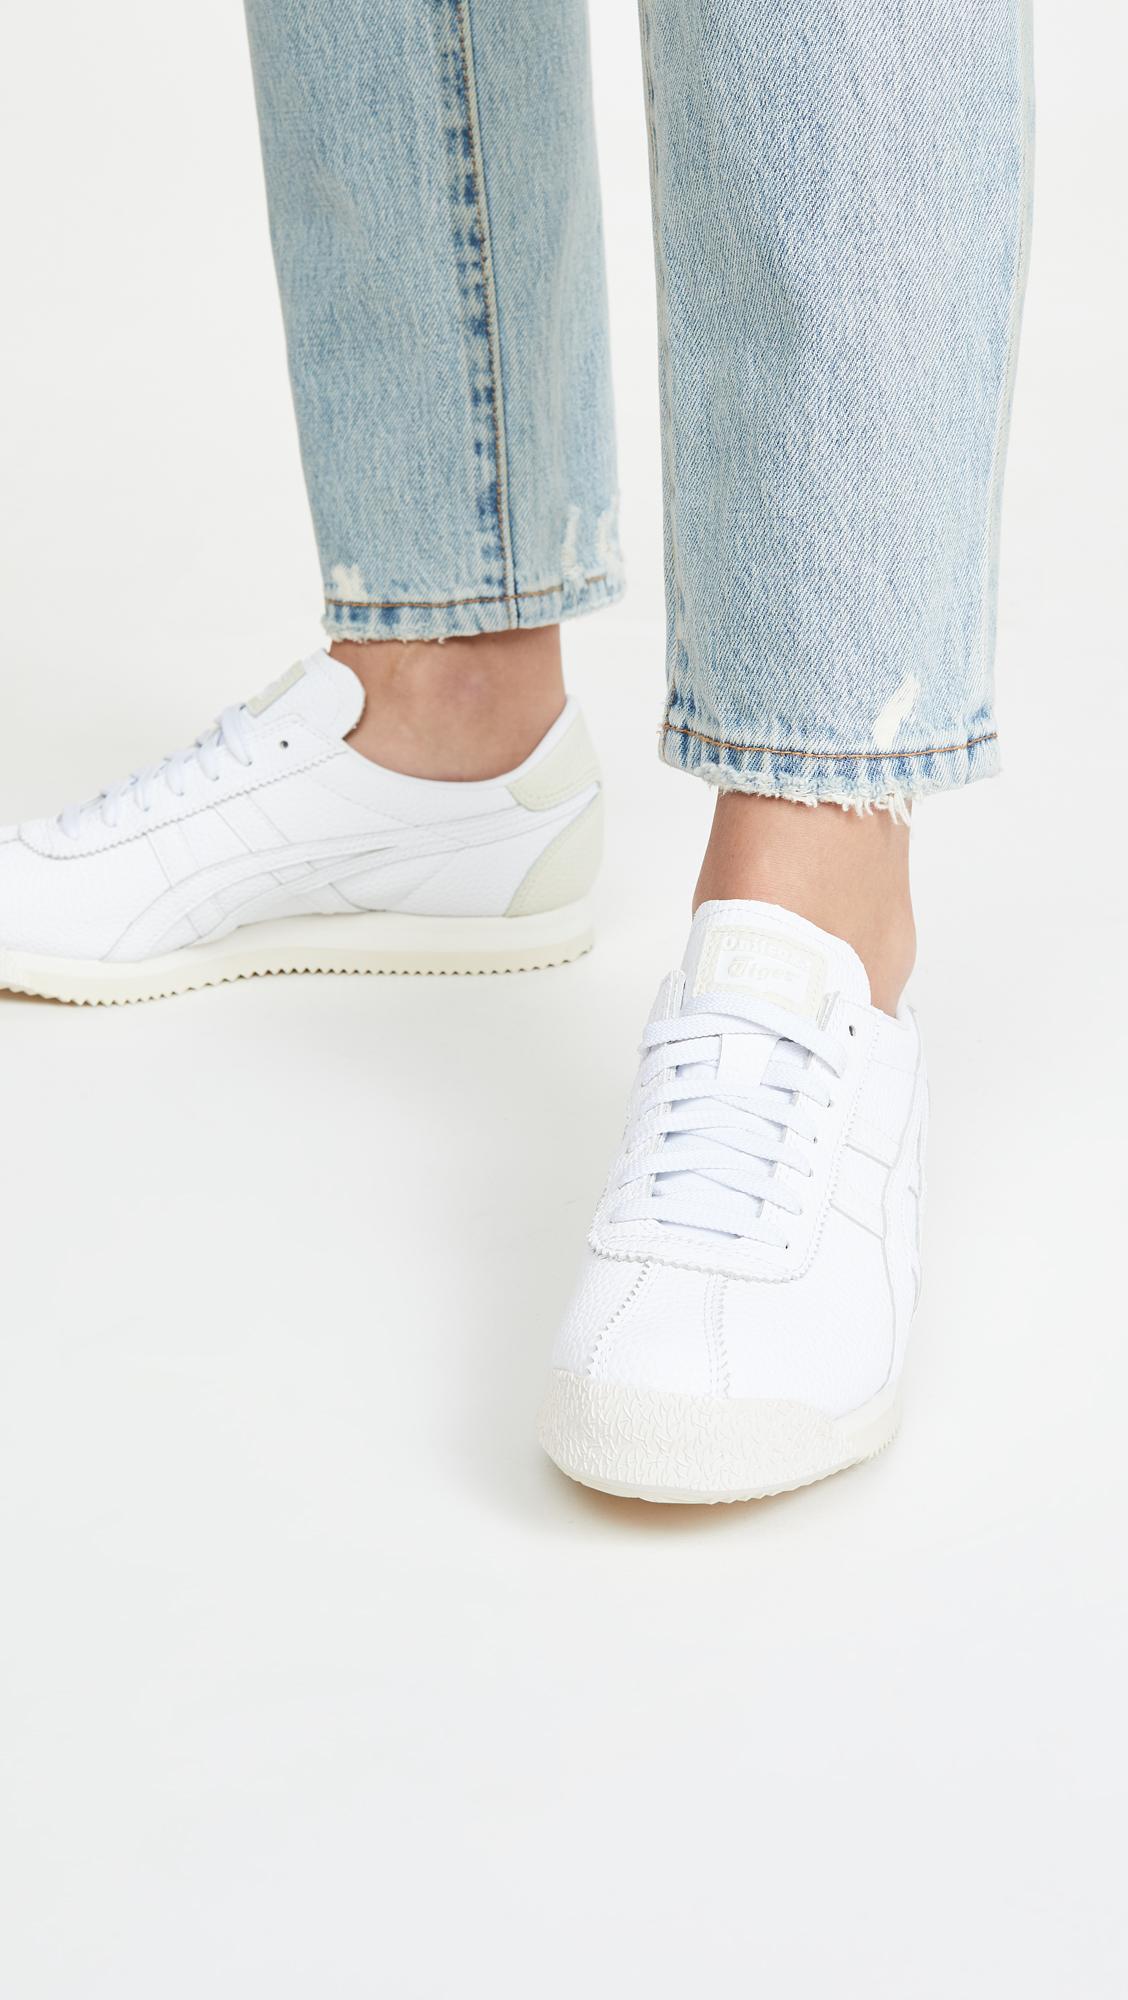 Onitsuka Tiger Tiger Corsair Sneakers in White | Lyst